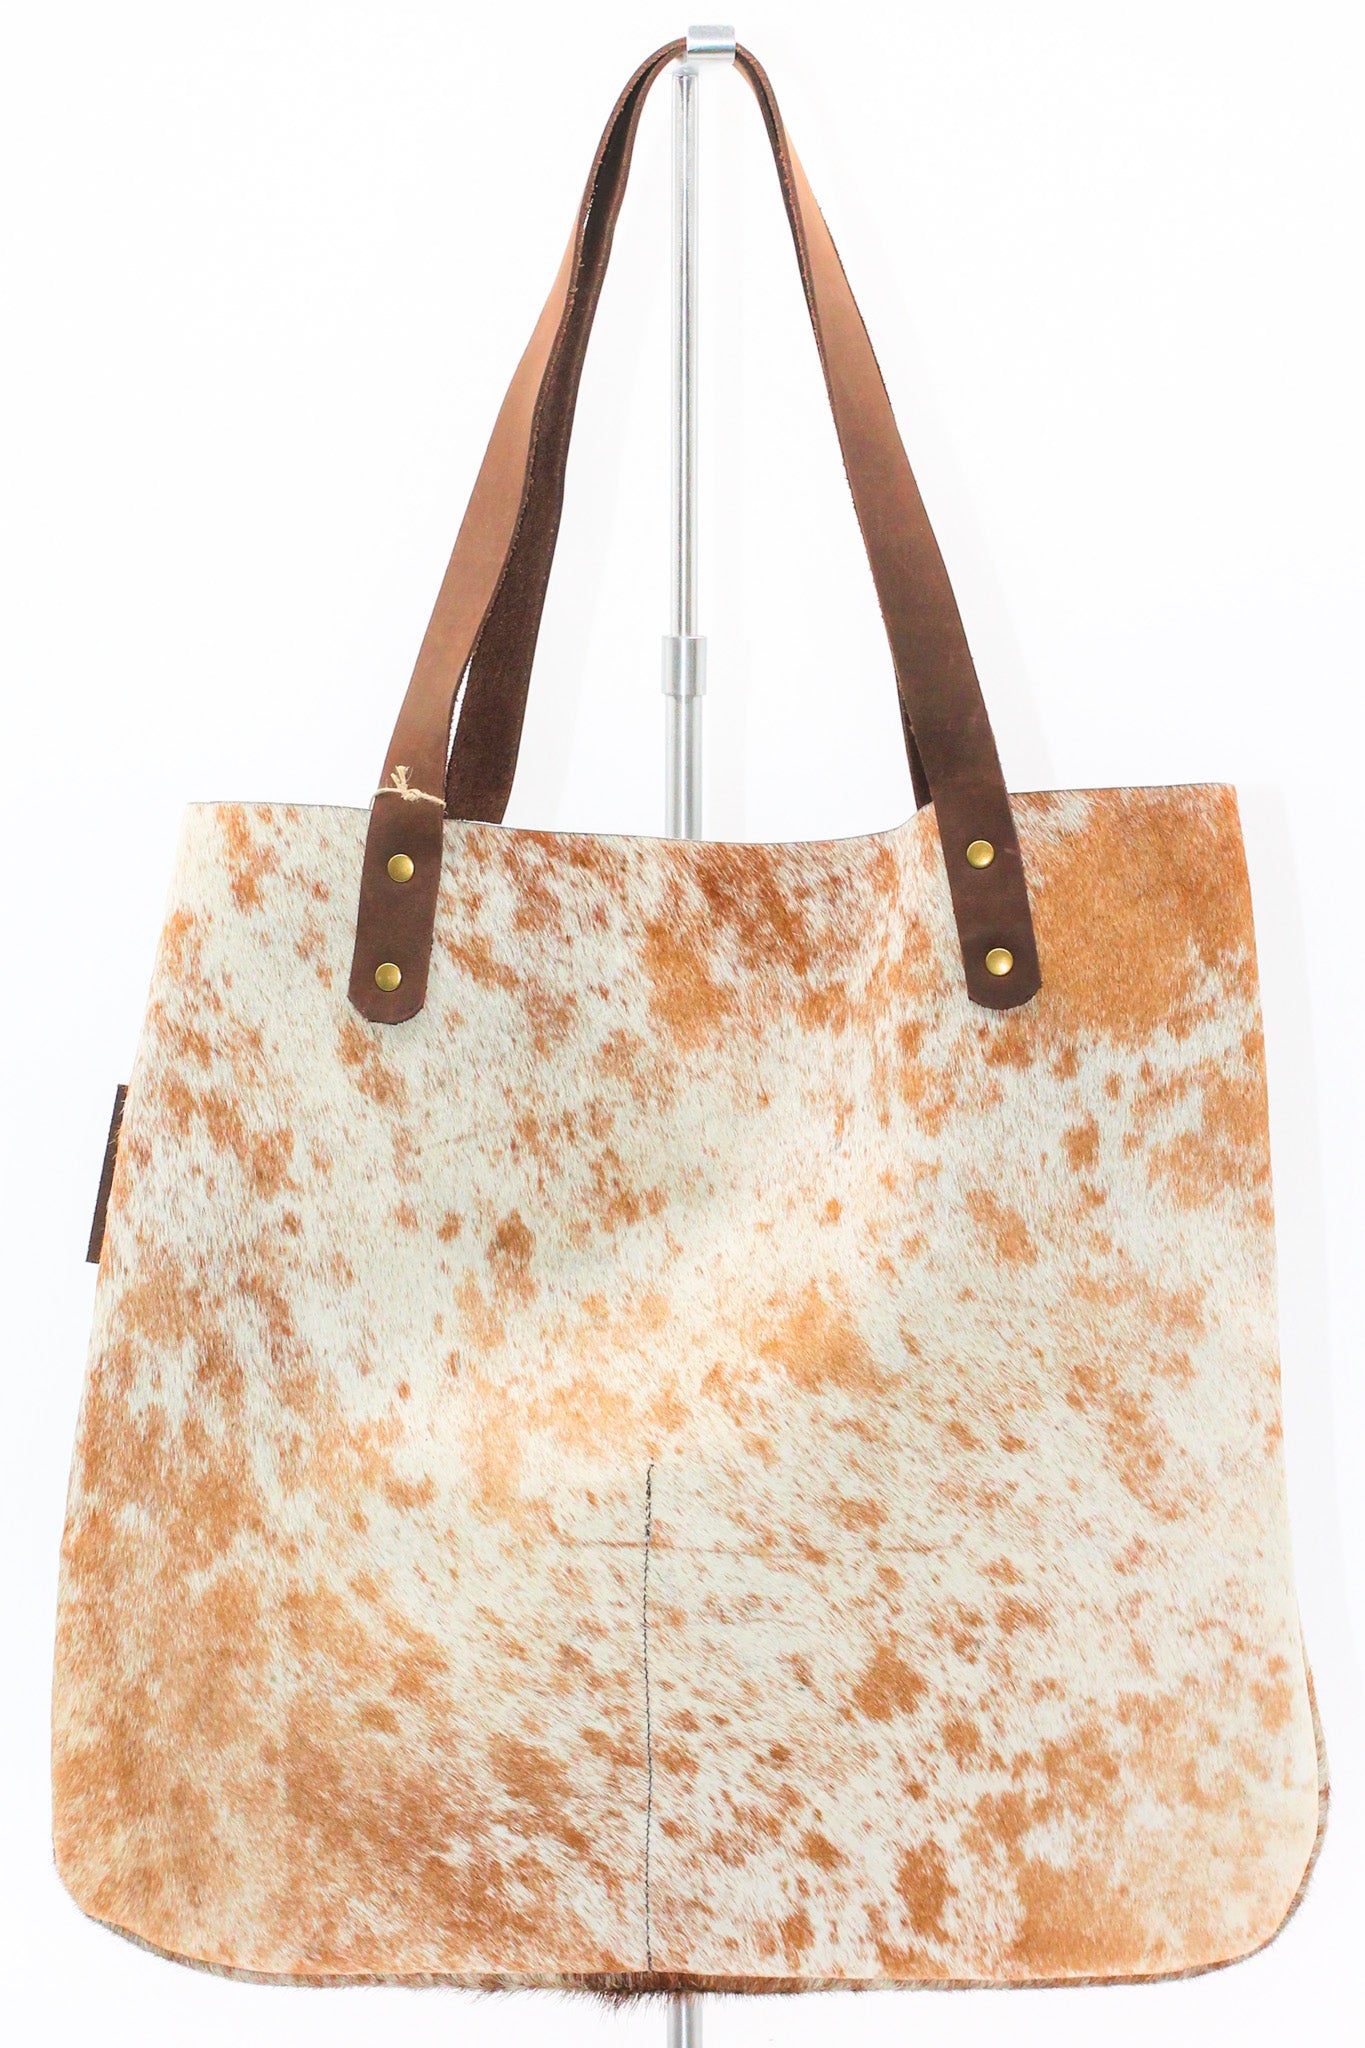 Everyday Leather Tote